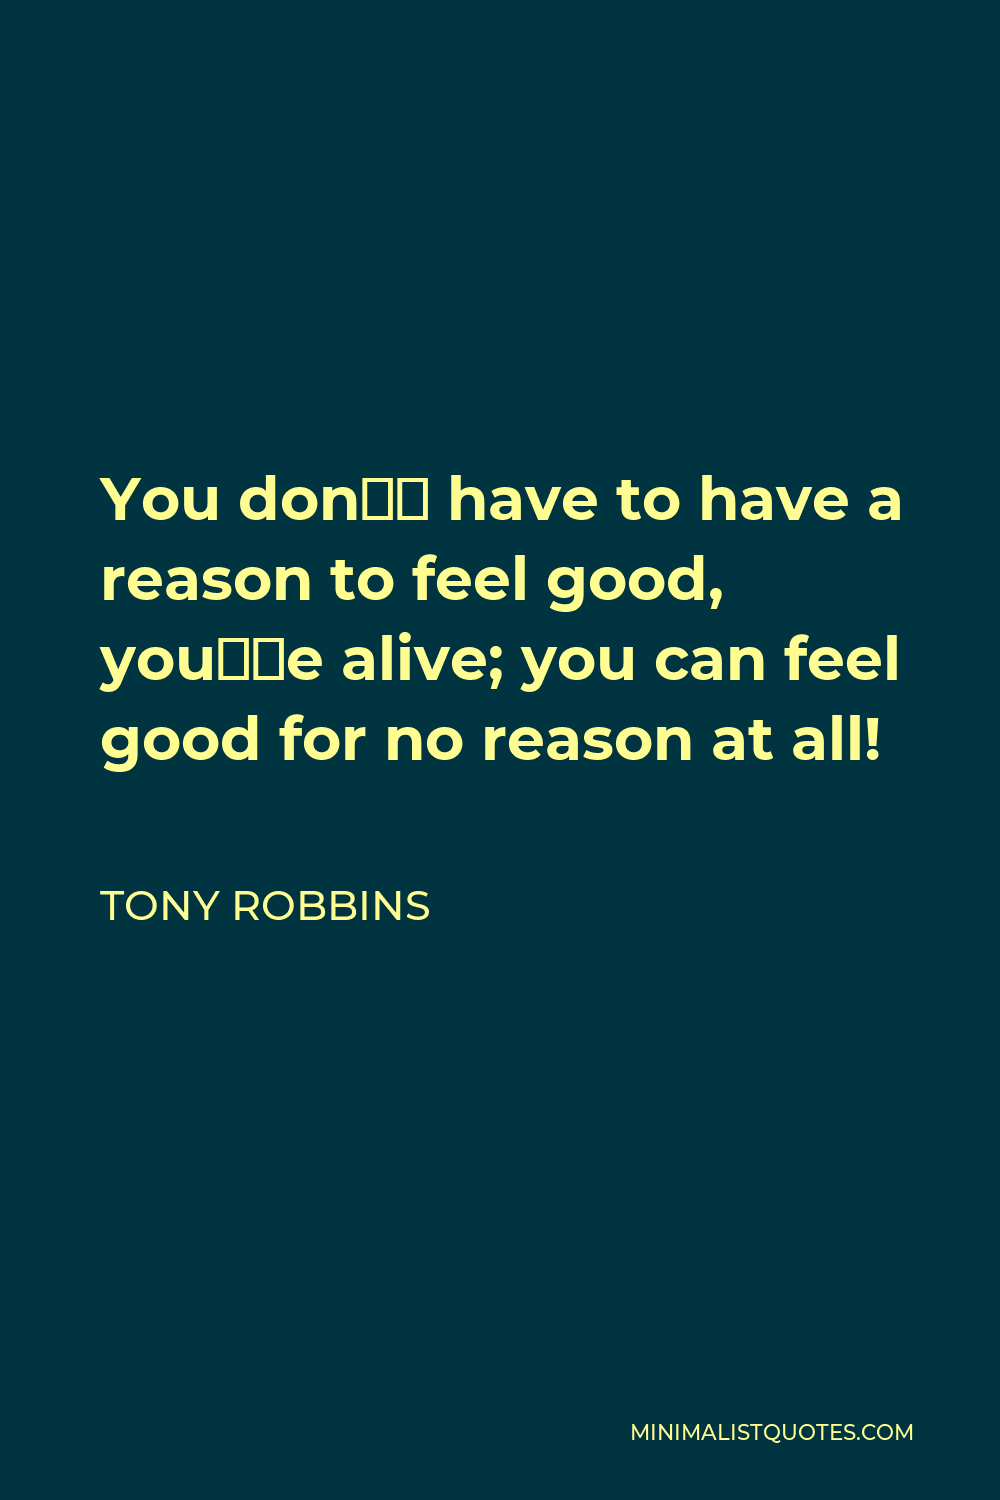 Tony Robbins Quote - You don’t have to have a reason to feel good, you’re alive; you can feel good for no reason at all!